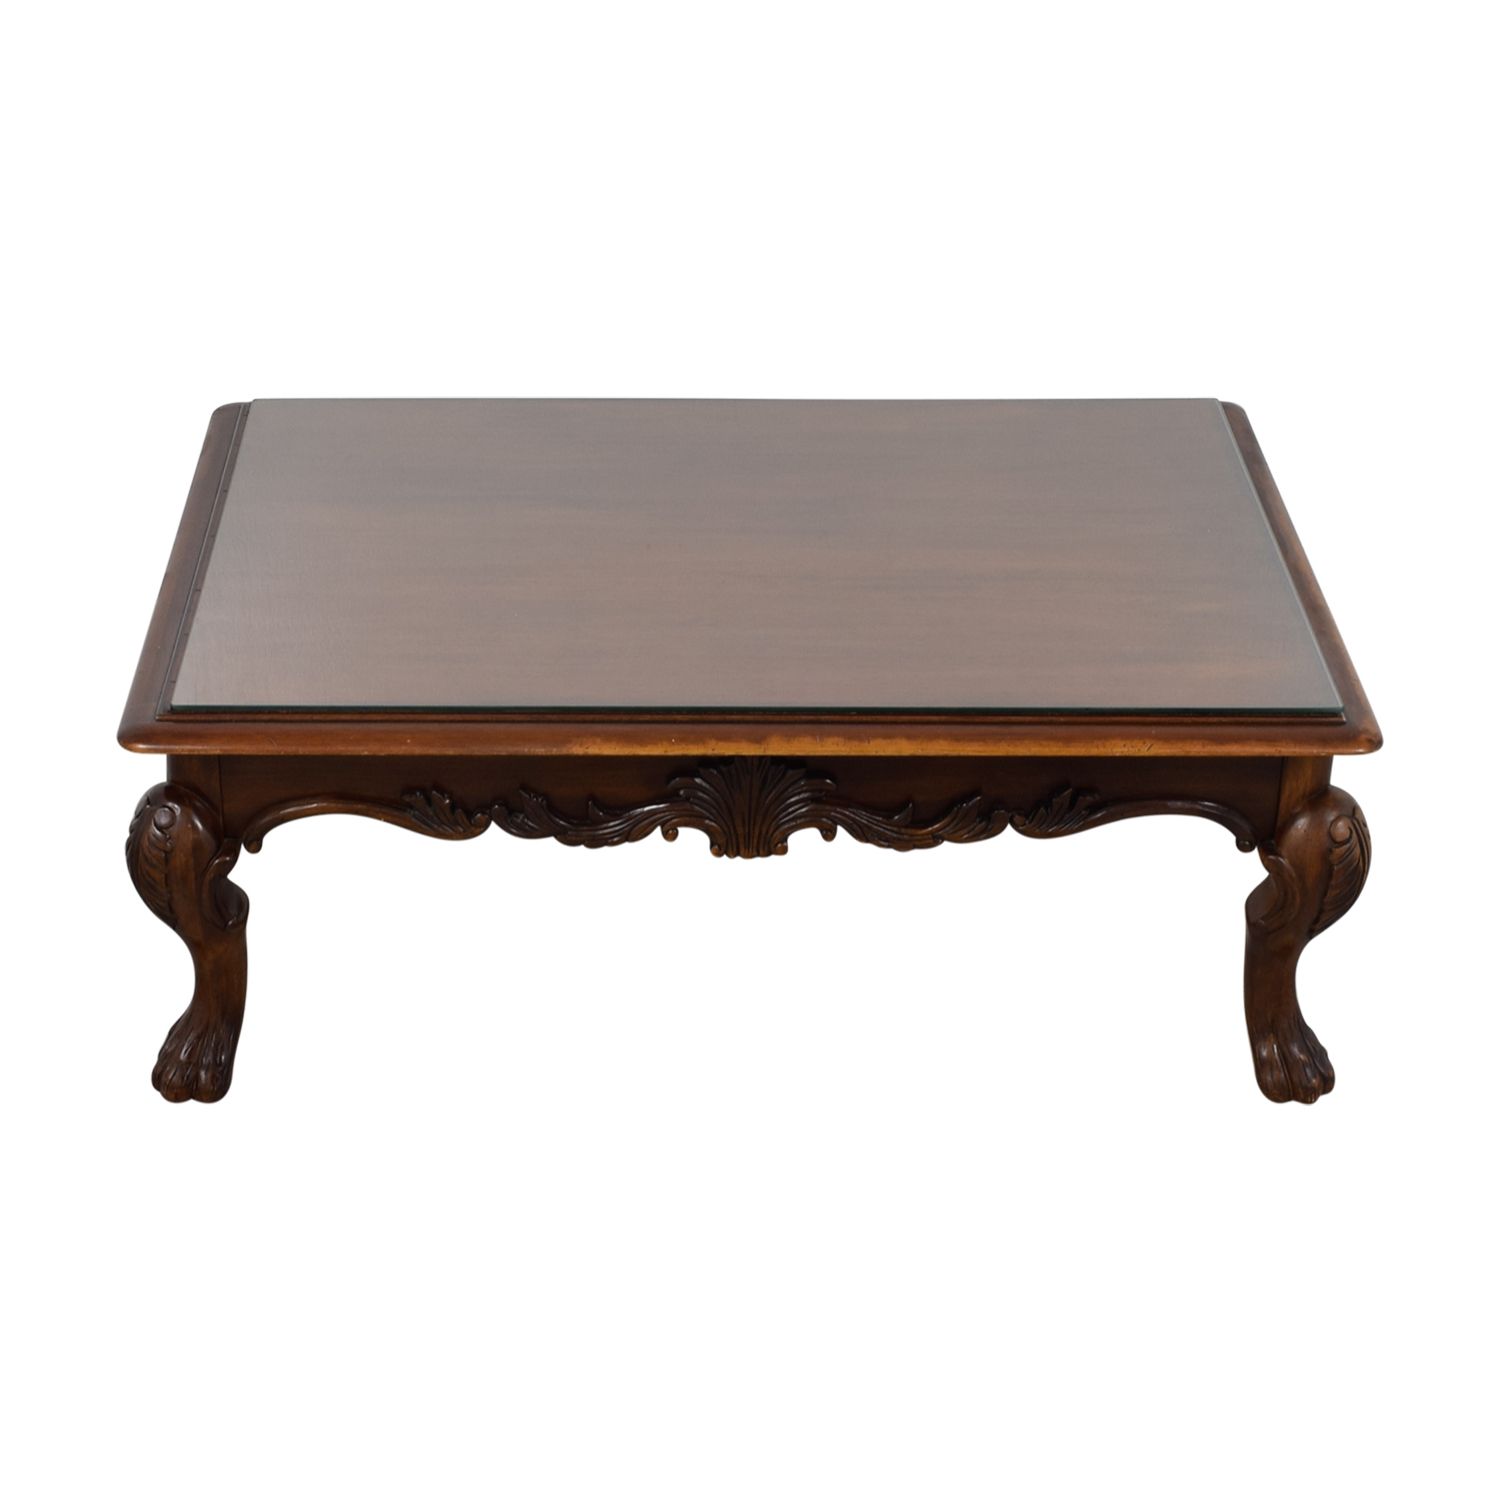 [%fashionable Rectangular Glass Top Coffee Tables Regarding 75% Off – Rectangular Carved Wood Coffee Table With Glass|75% Off – Rectangular Carved Wood Coffee Table With Glass Intended For Current Rectangular Glass Top Coffee Tables%] (View 10 of 20)